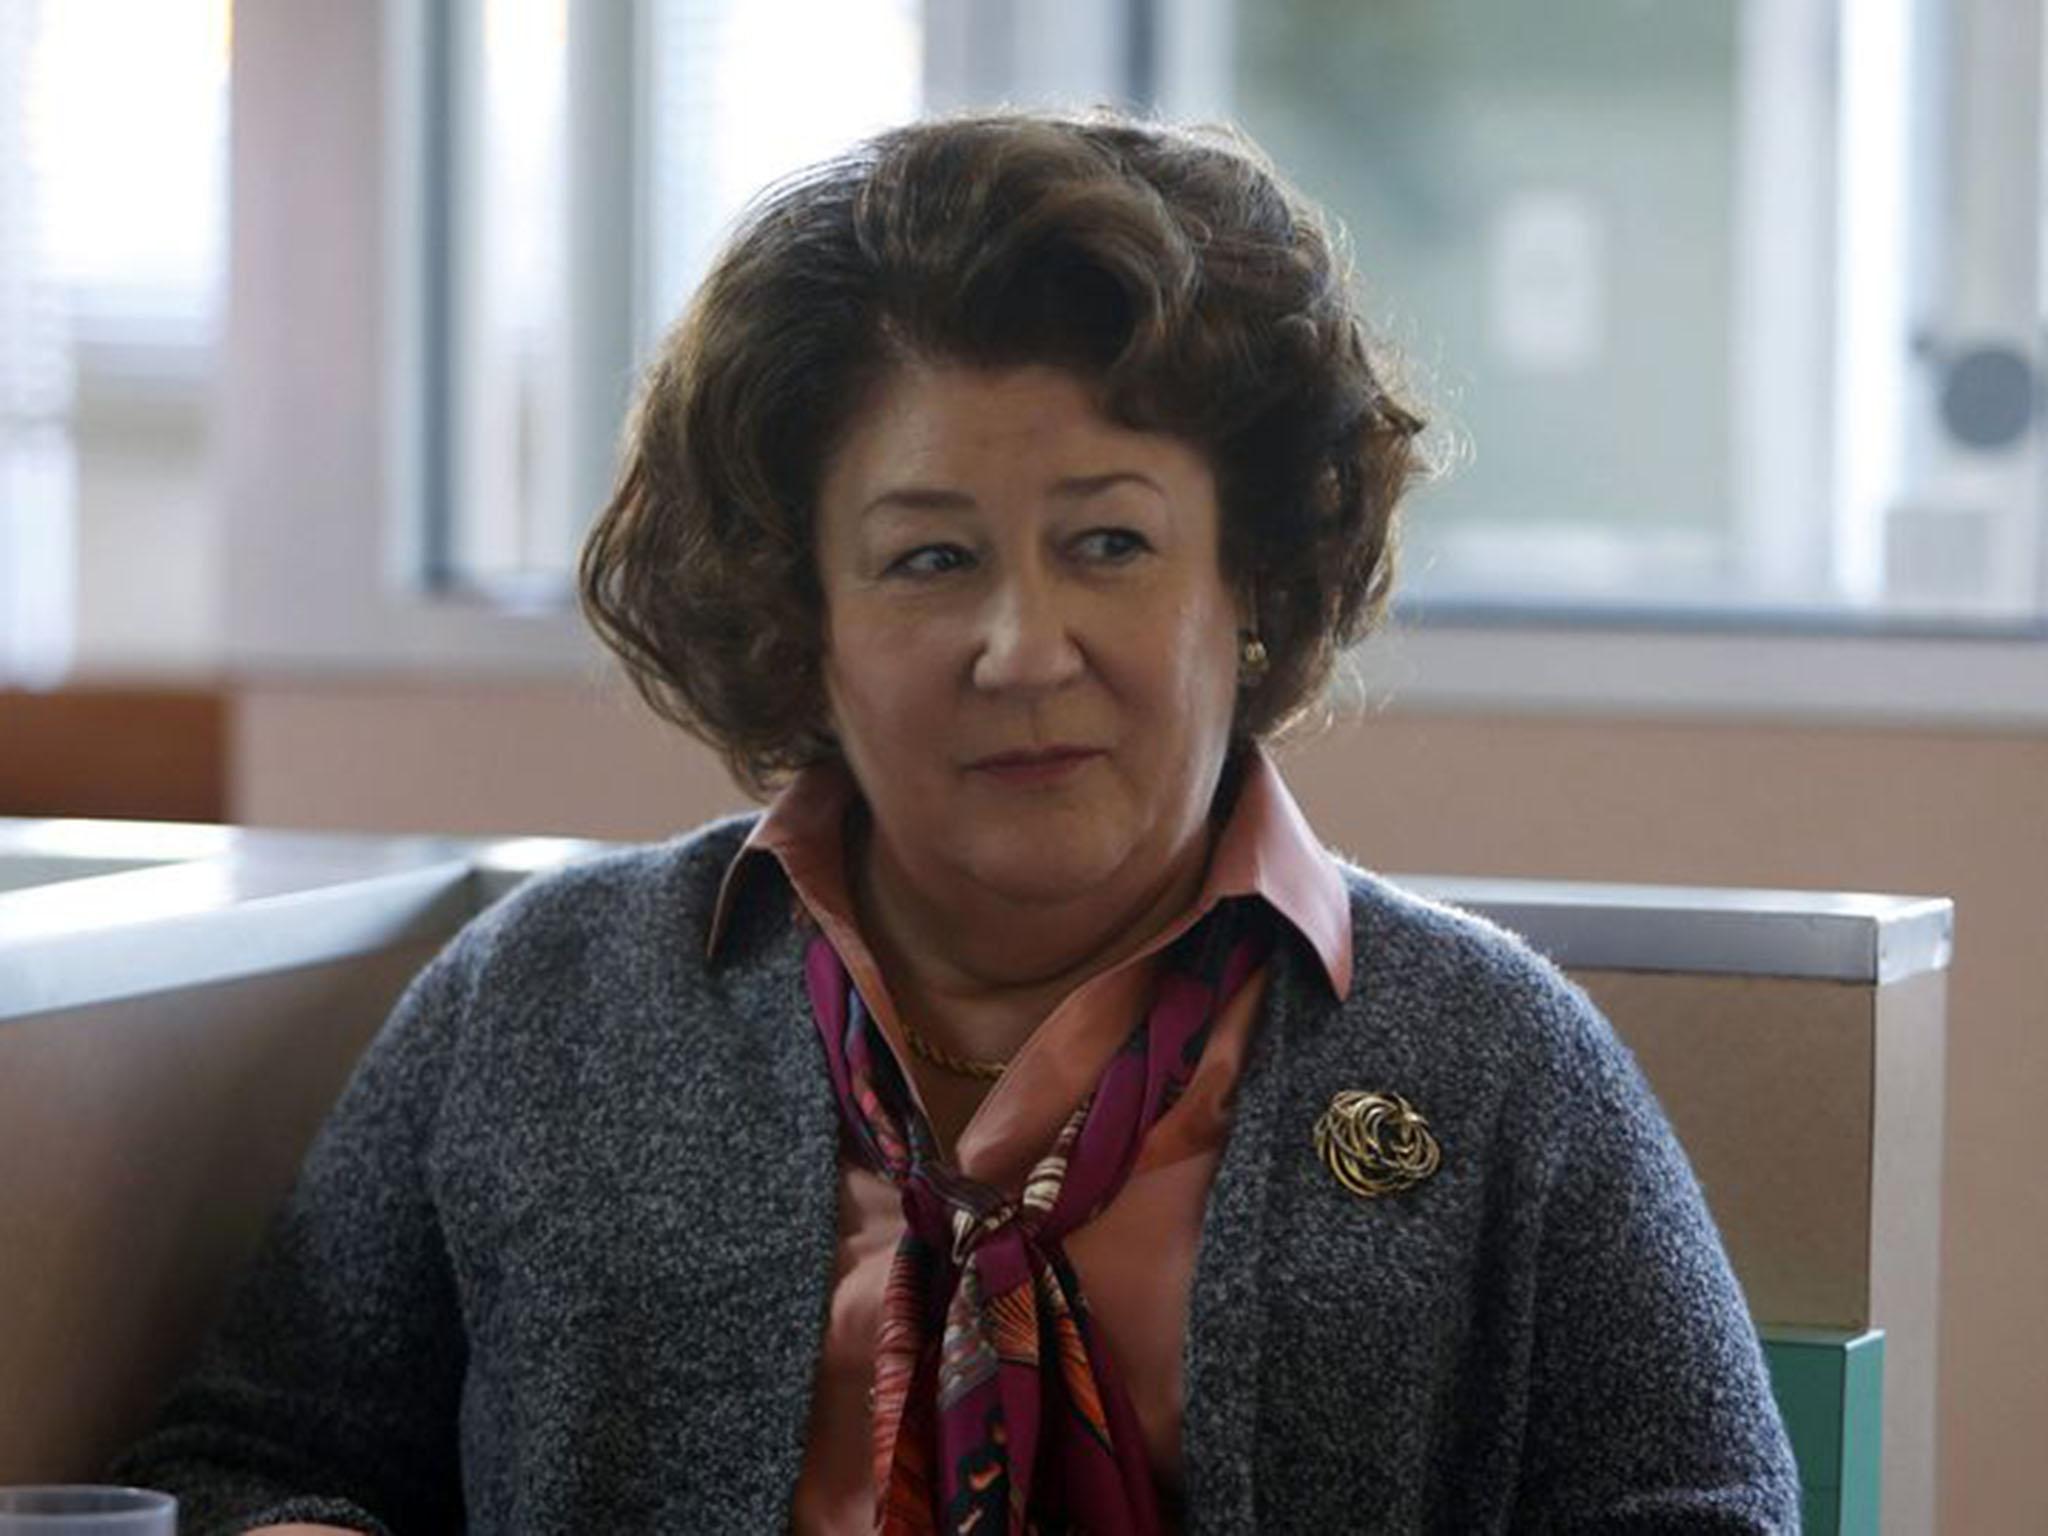 Margo Martindale who plays Claudia on 'The Americans' describes herself as an actress who plays characters